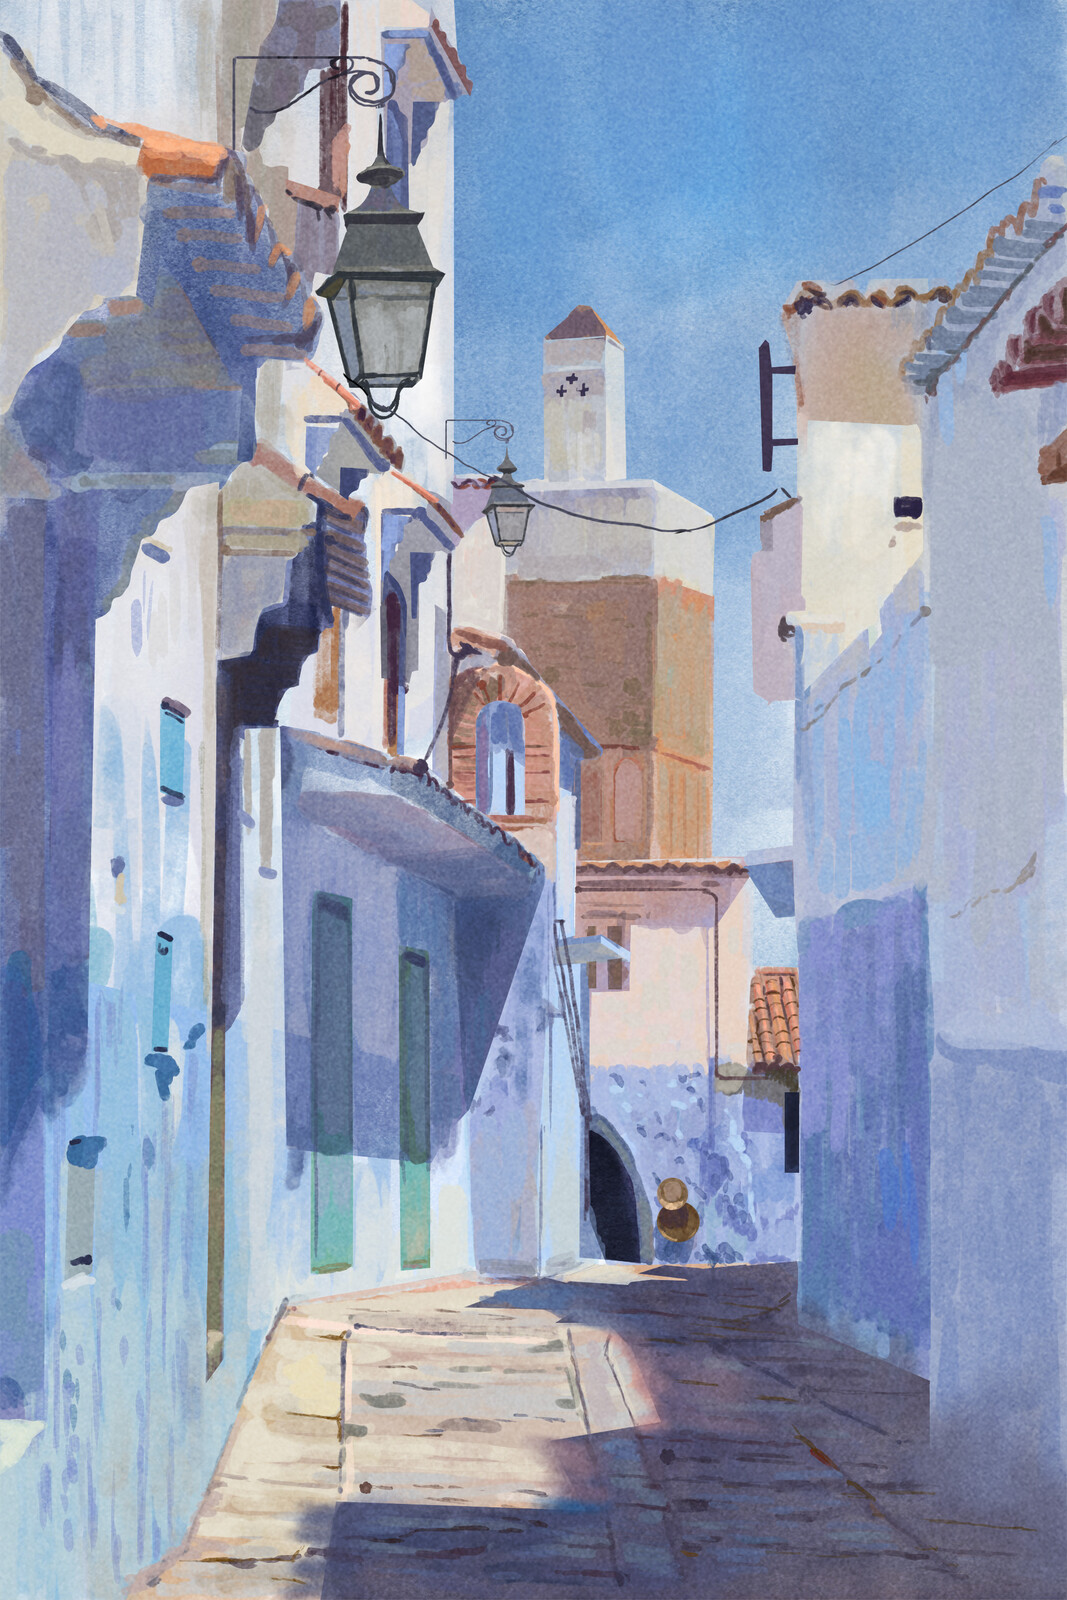 More north African Plein air!! Morocco to be more precise. Photo ref used